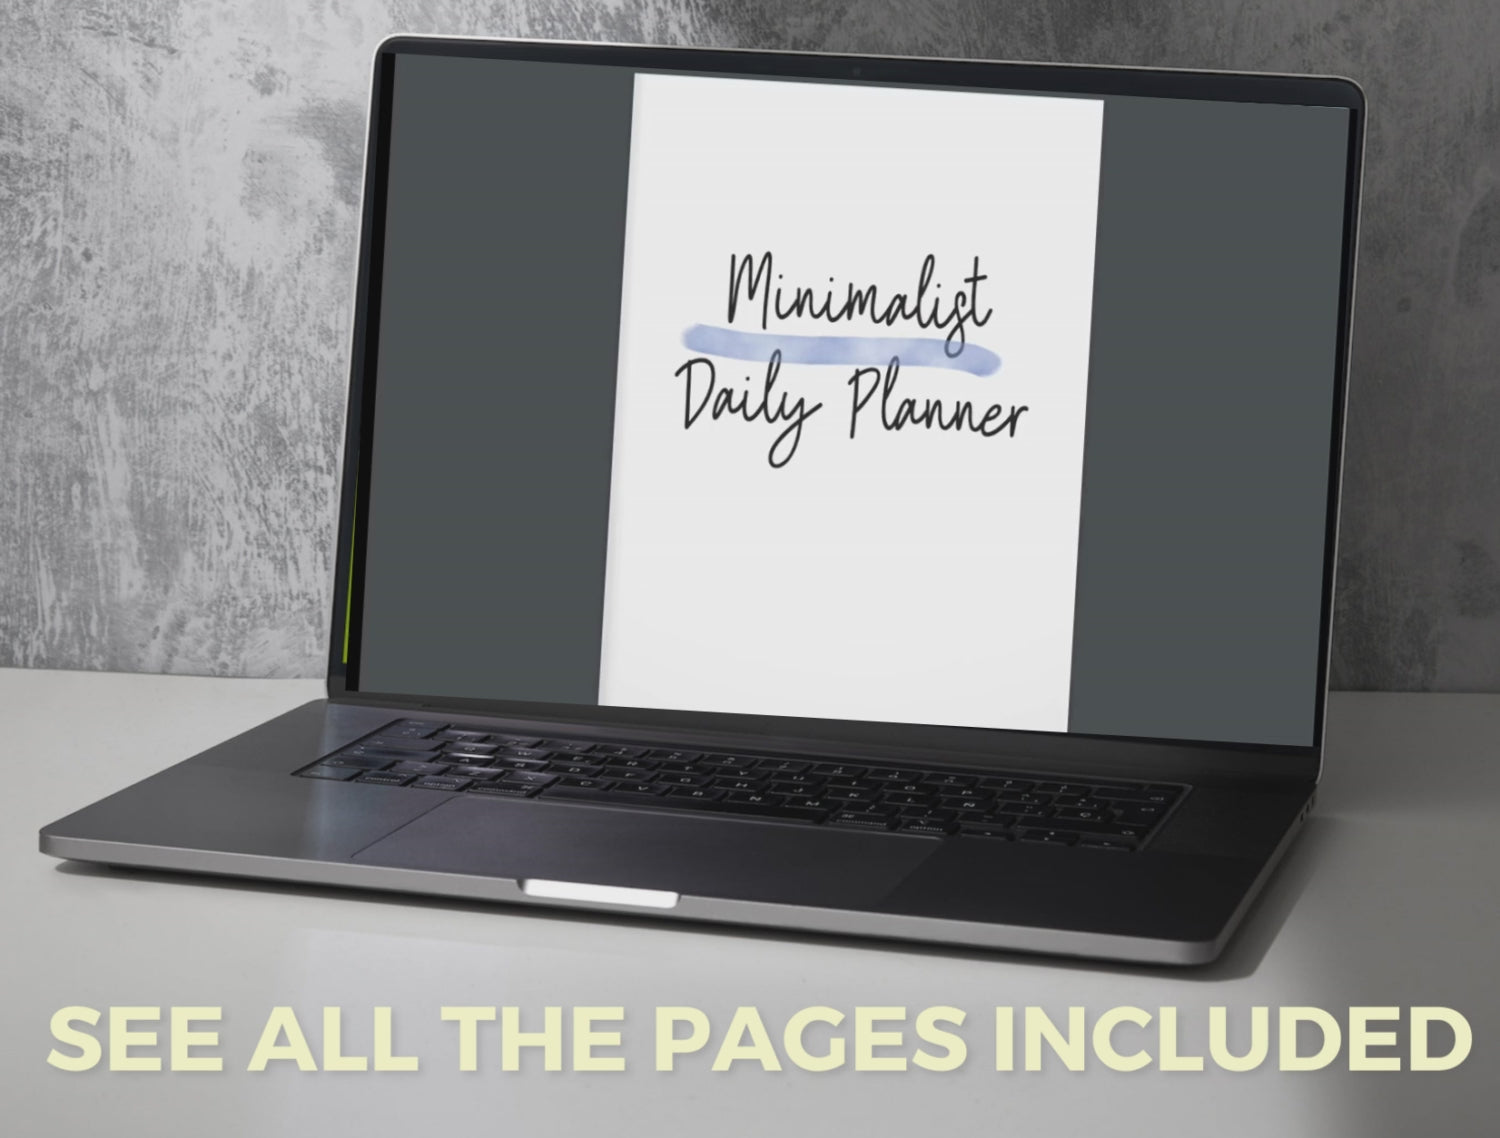 The daily minimalist planner video to show all pages. 